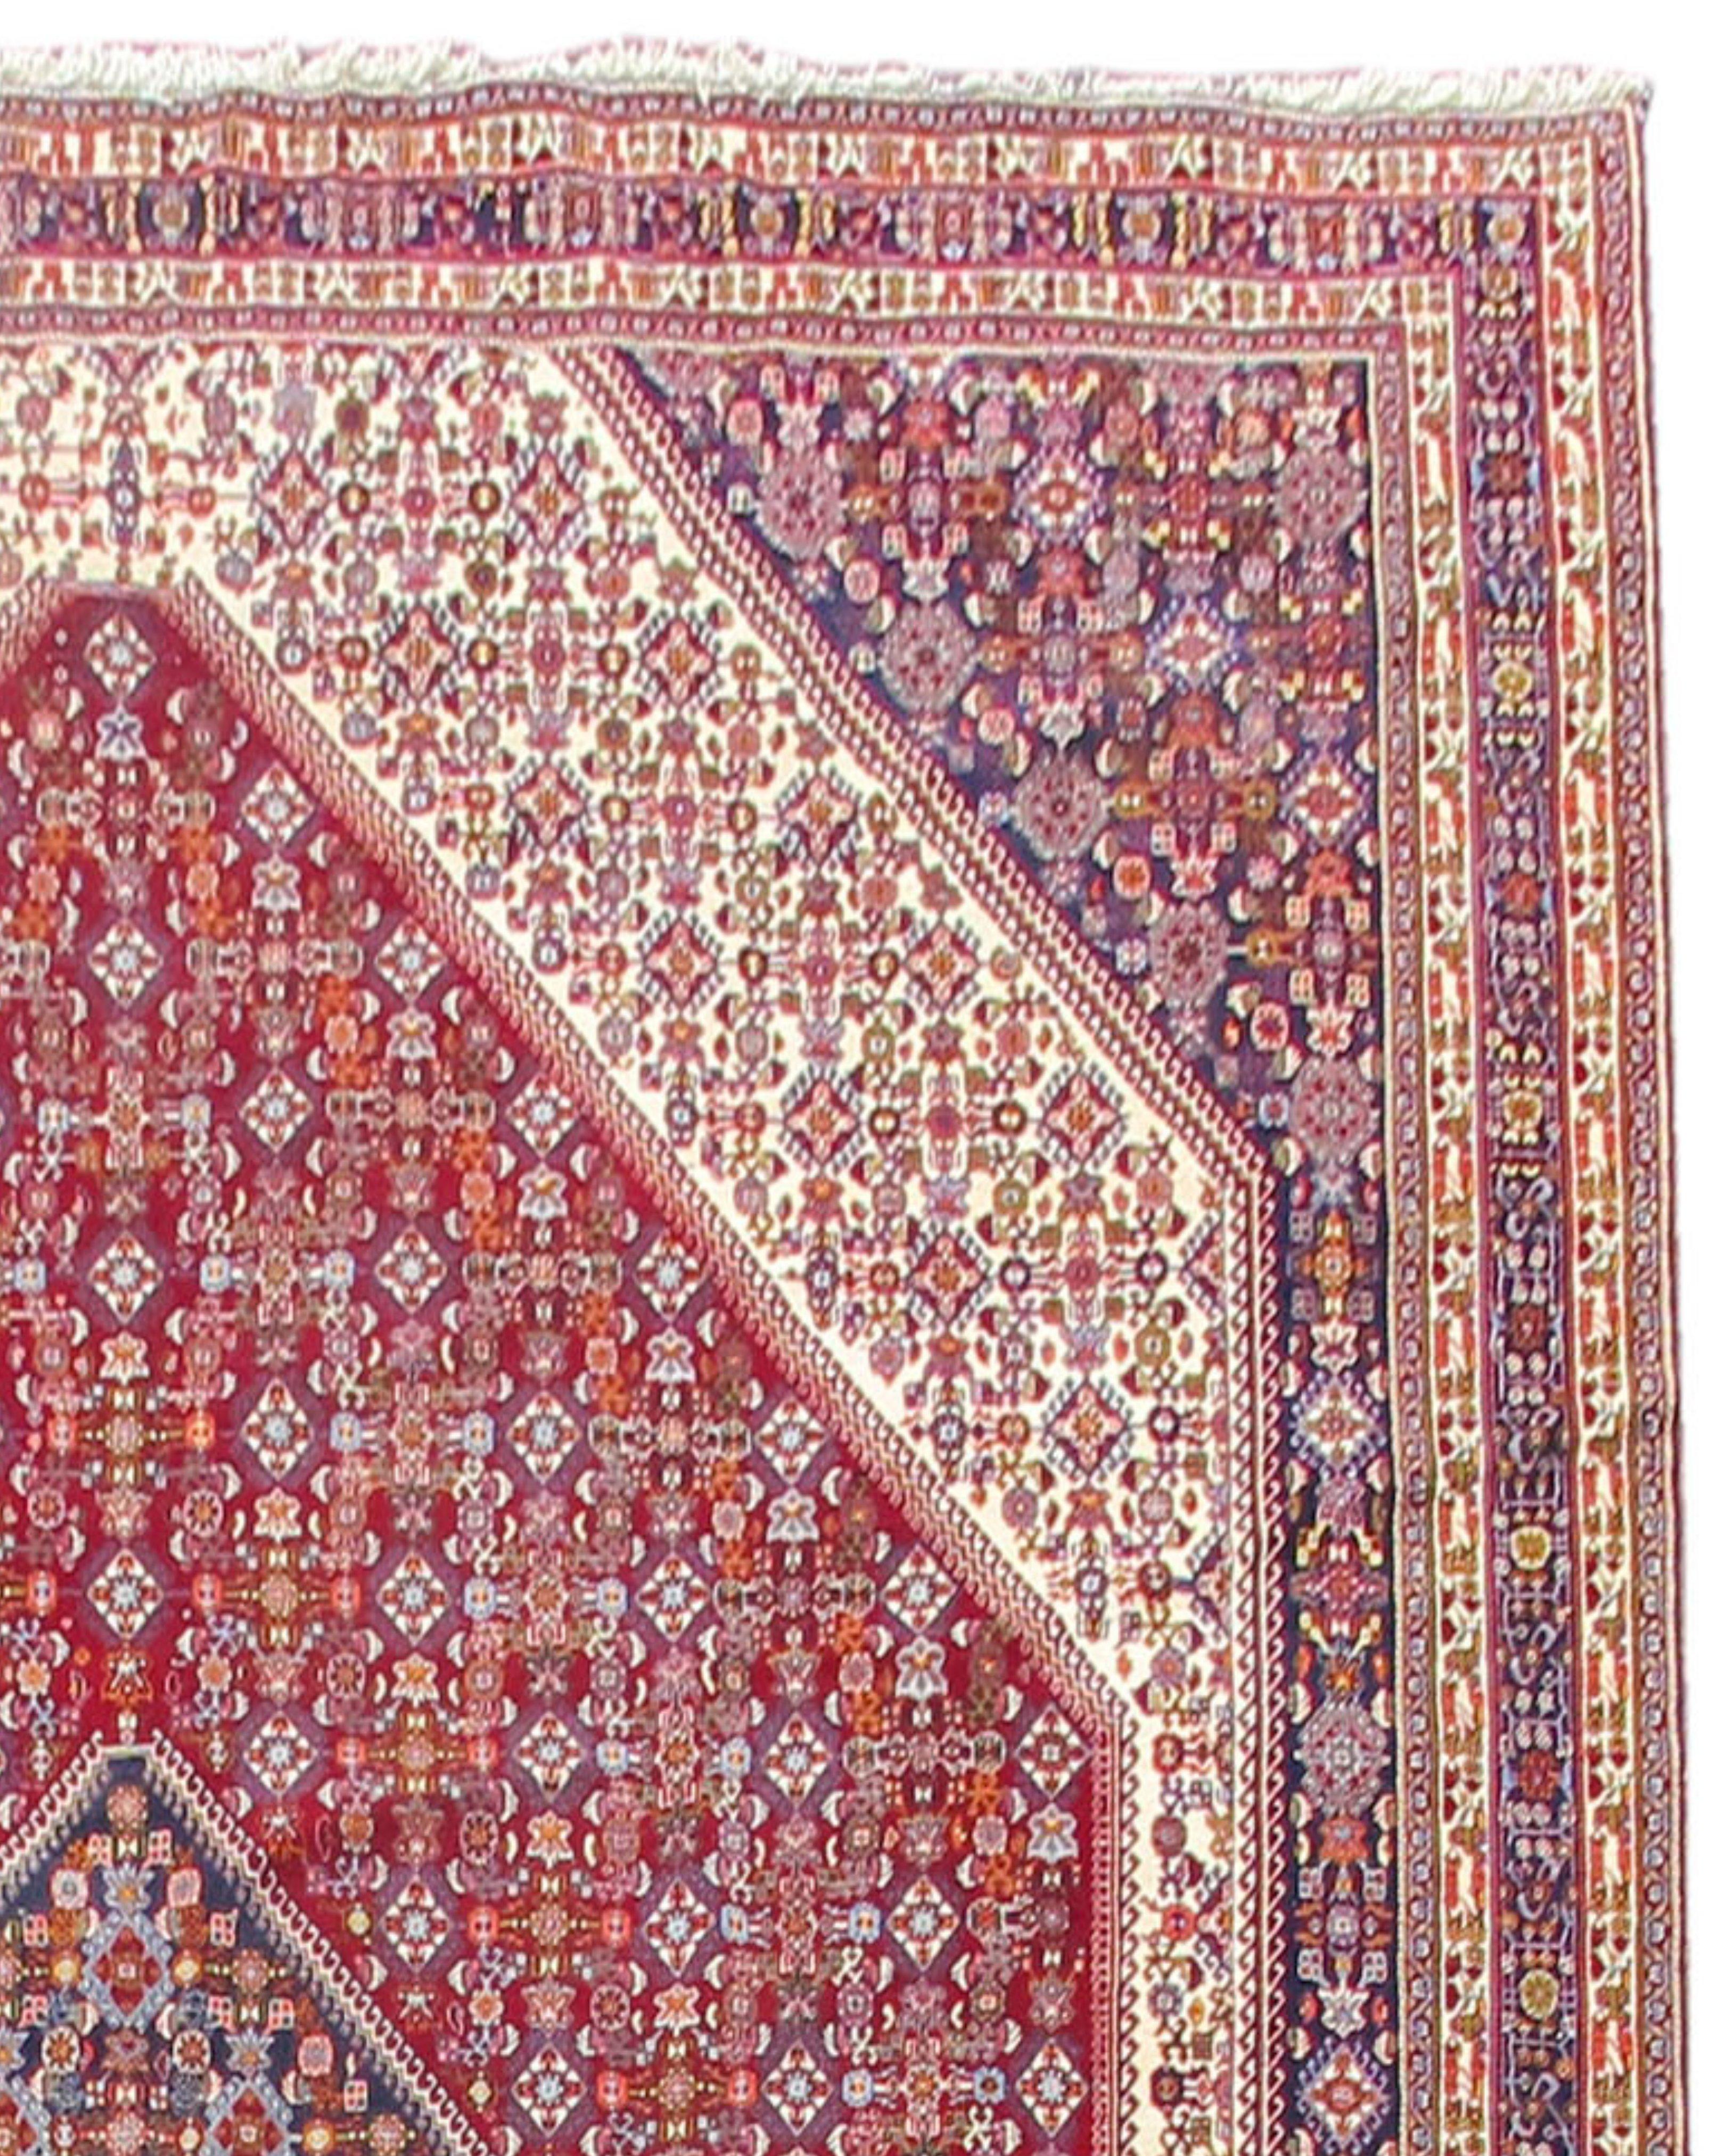 Large Oversized Mint Condition Persian Qashqai Carpet, Late 20th Century

An incredible carpet certainly made to order. Mint condition.

Additional Information:
Dimensions: 9'10